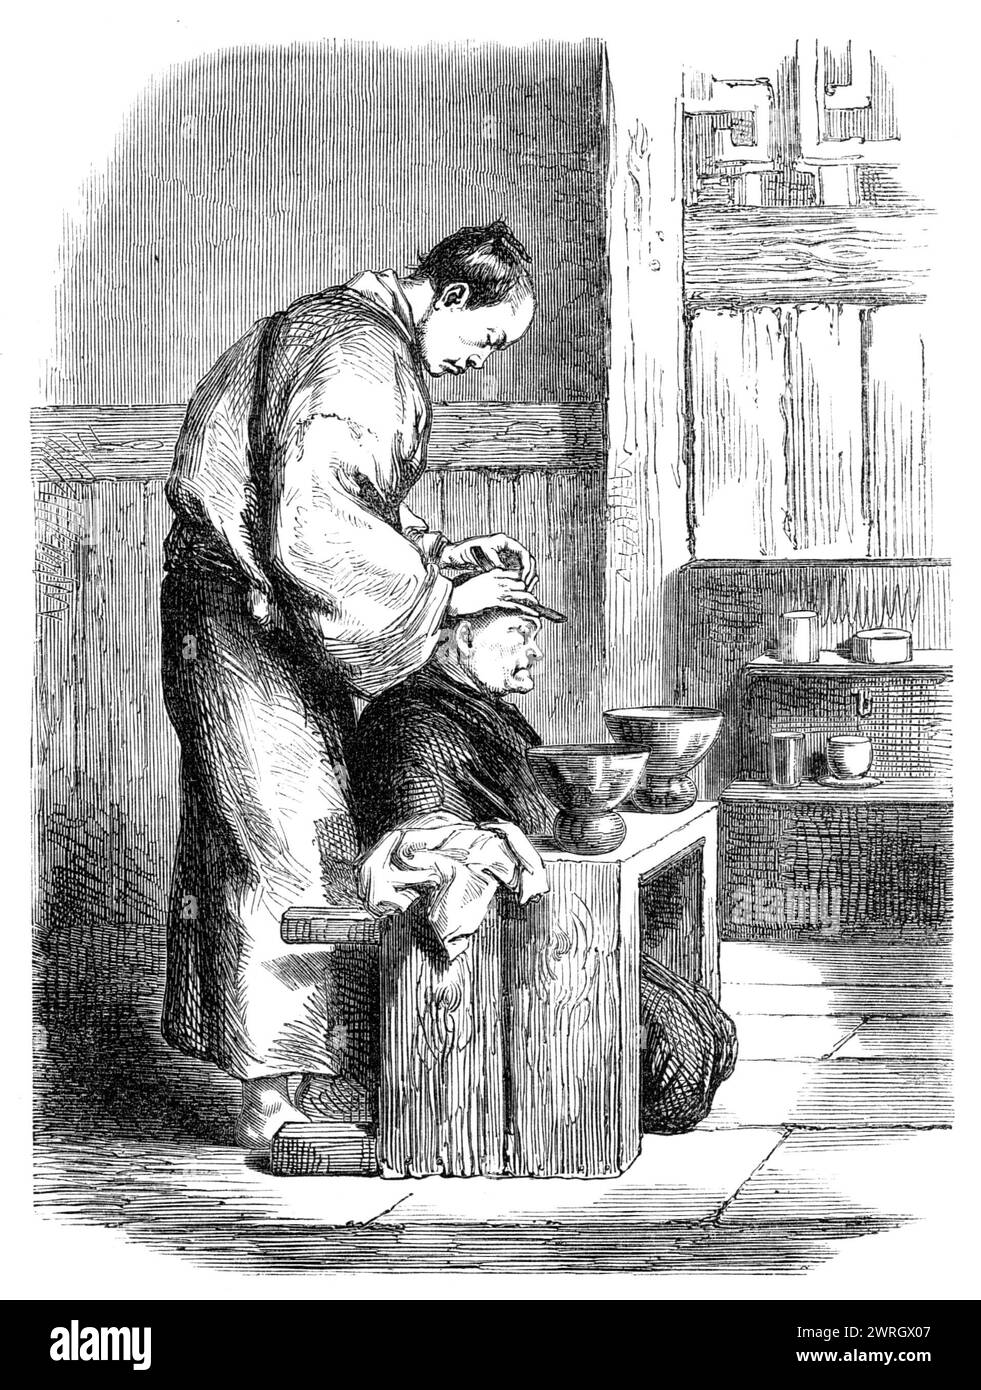 A Japanese barber - from a sketch by our special artist, 1864. 'We present this week another of those characteristic Illustrations of the manners and customs of the Japanese people, with which our Artist and Correspondent at Yokohama has abundantly supplied us. The sketch we have here engraved represents a Japanese barber in the act of dressing the head of one of his patients. He is gathering up the topknot, which is to be tied with an ornamental band, the rest of the crown being scrupulously shaved. The whole operation is tedious enough, but the elderly gentleman whom we see under the barber' Stock Photo